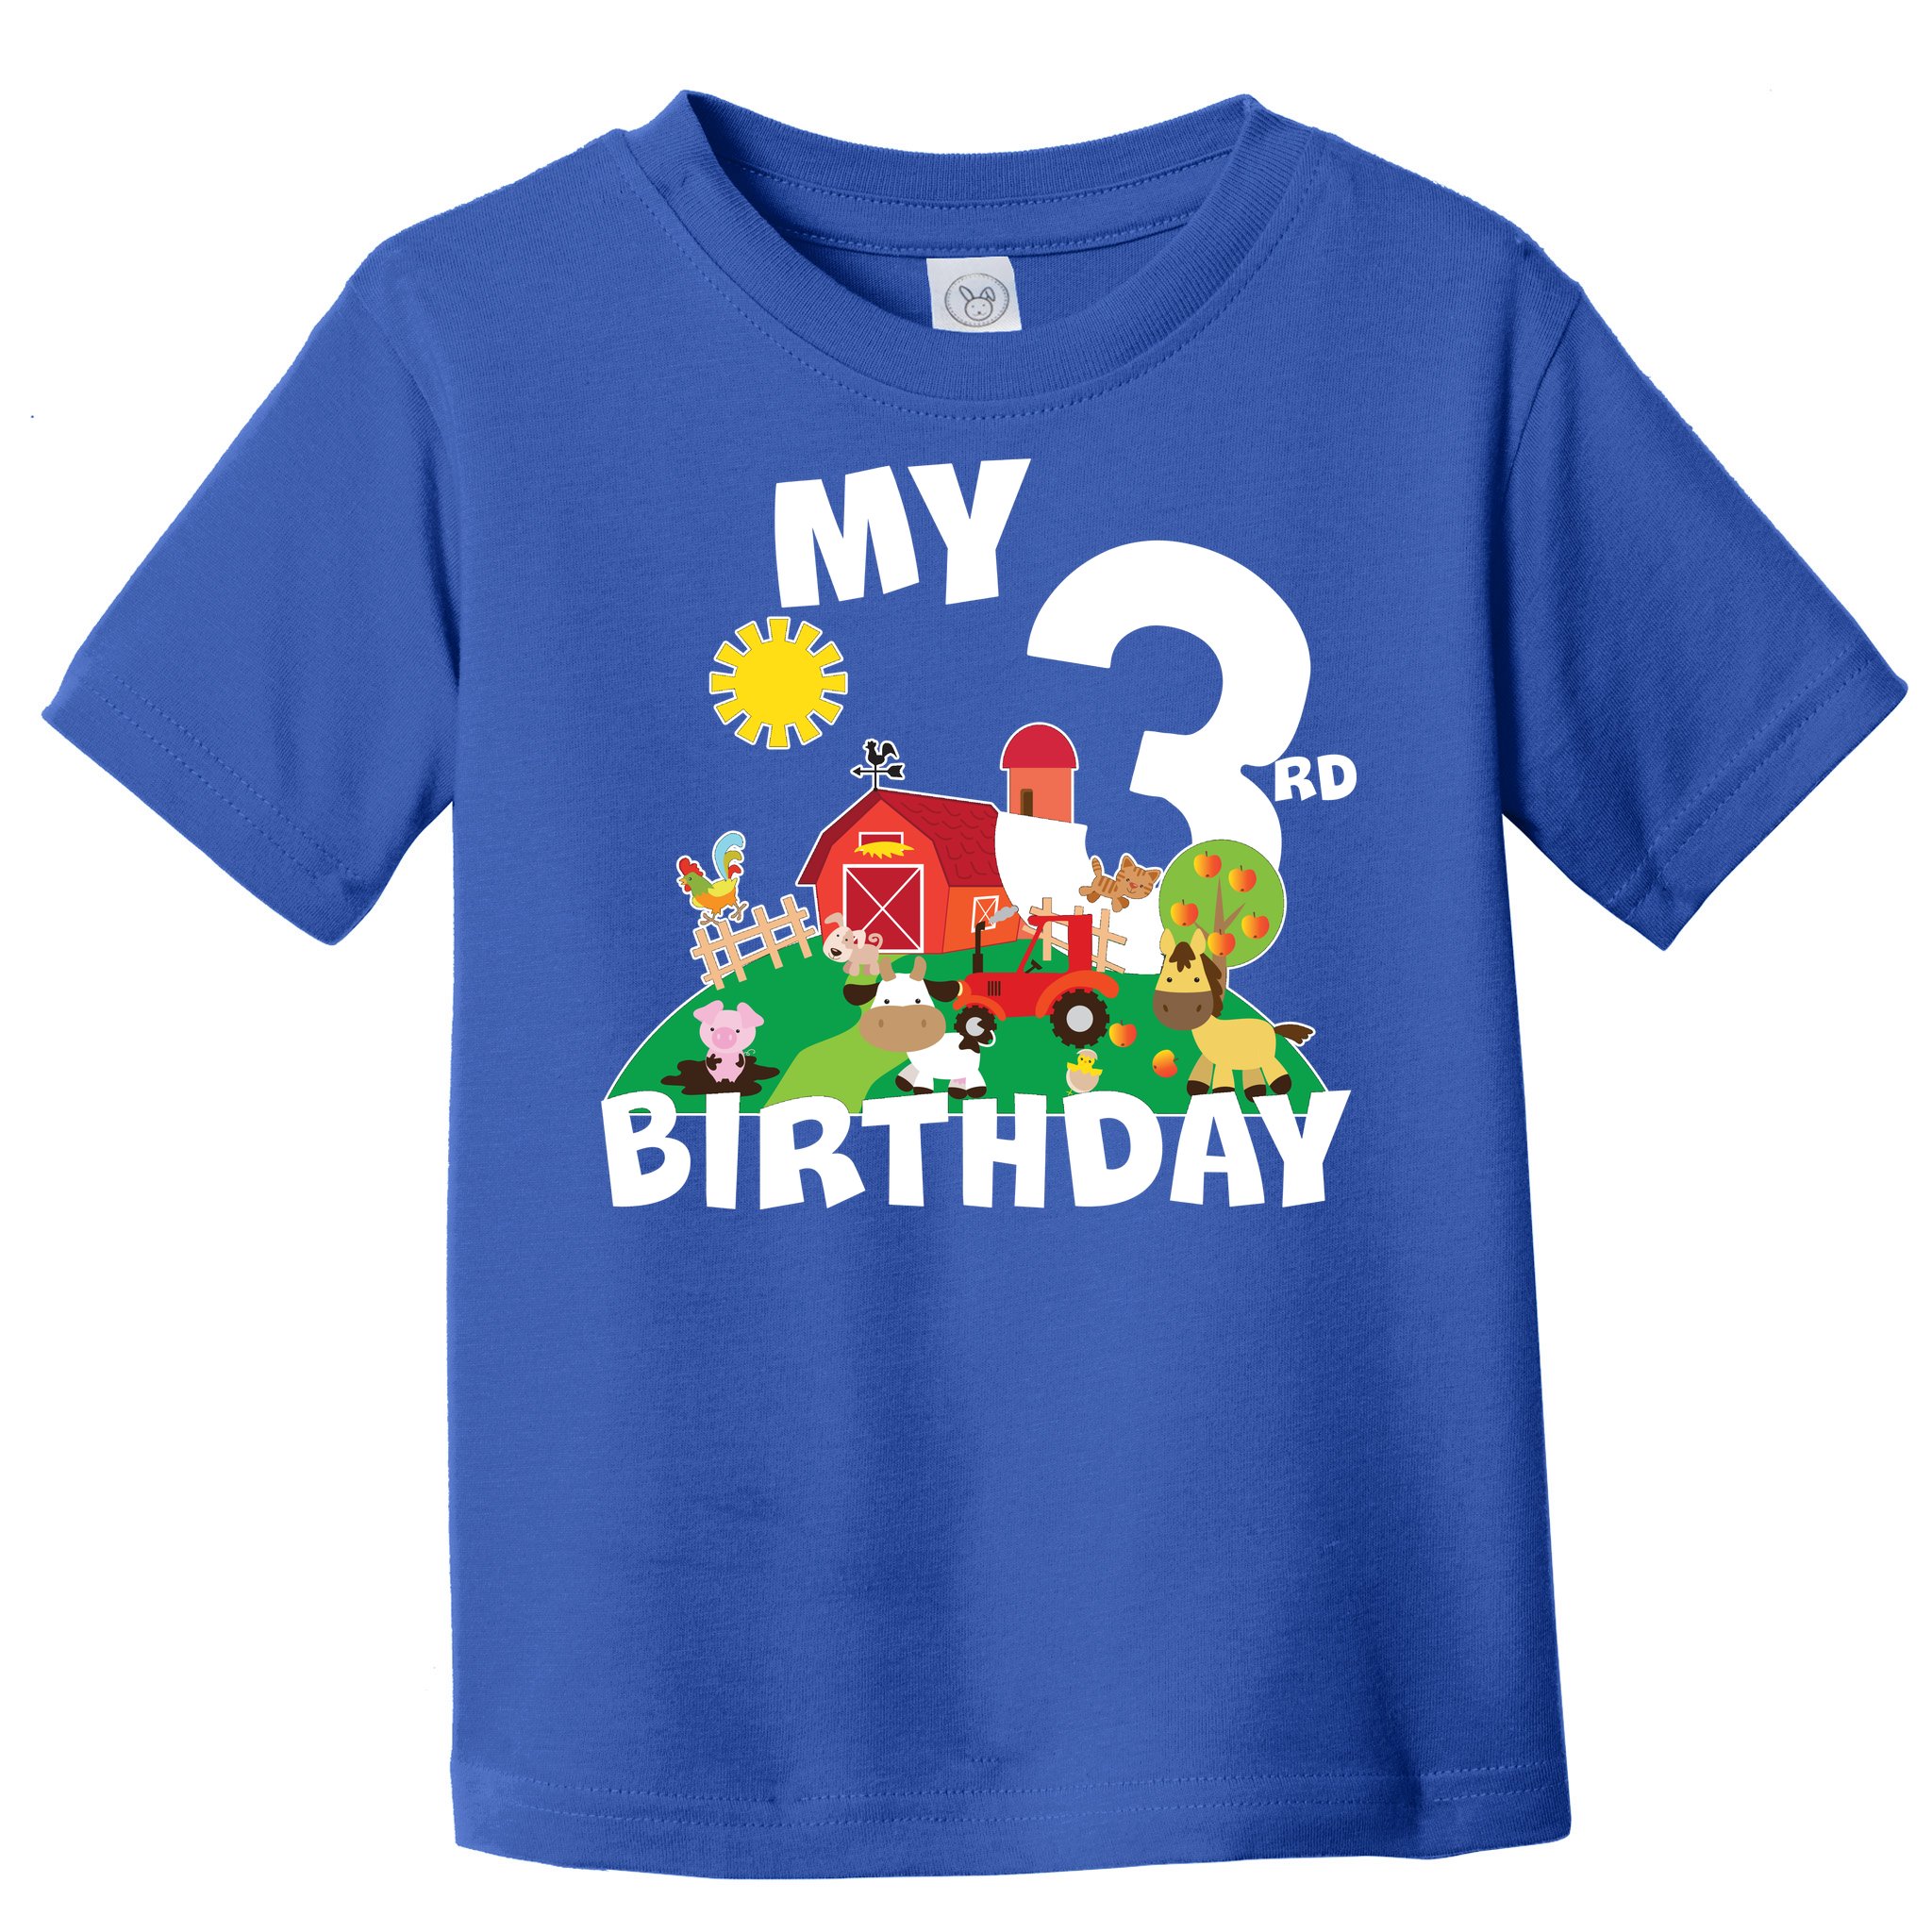 Your Birth Year T-Shirt Personalized Vintage Available in Sizes S-4XL 100% Cotton 6.0 oz Available in Over 30 Colors